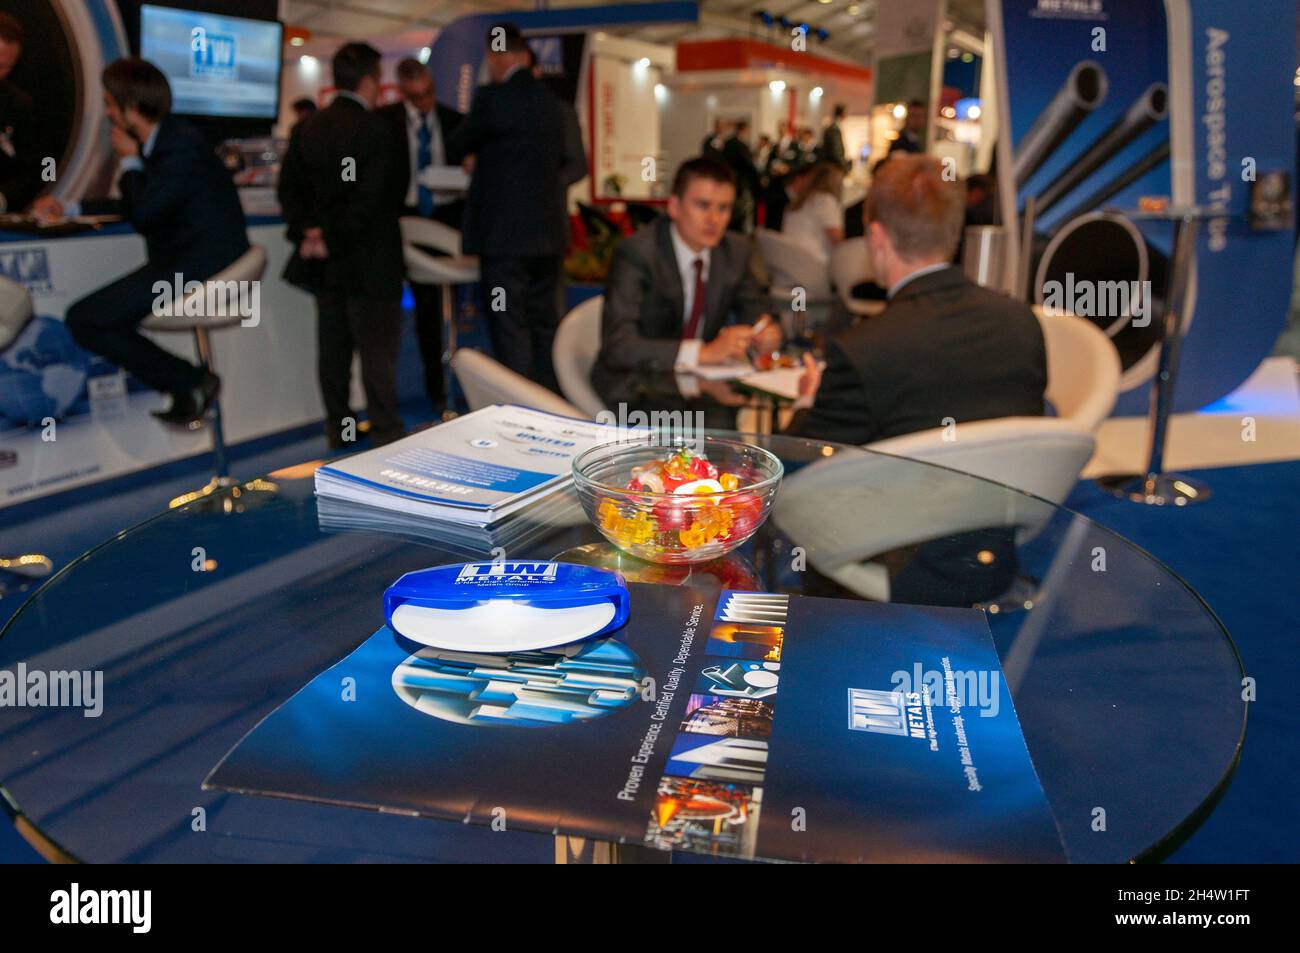 Trade stand at the Farnborough International Airshow 2014, trade show. Business meeting. TW Metals stall with brochure and sweets Stock Photo